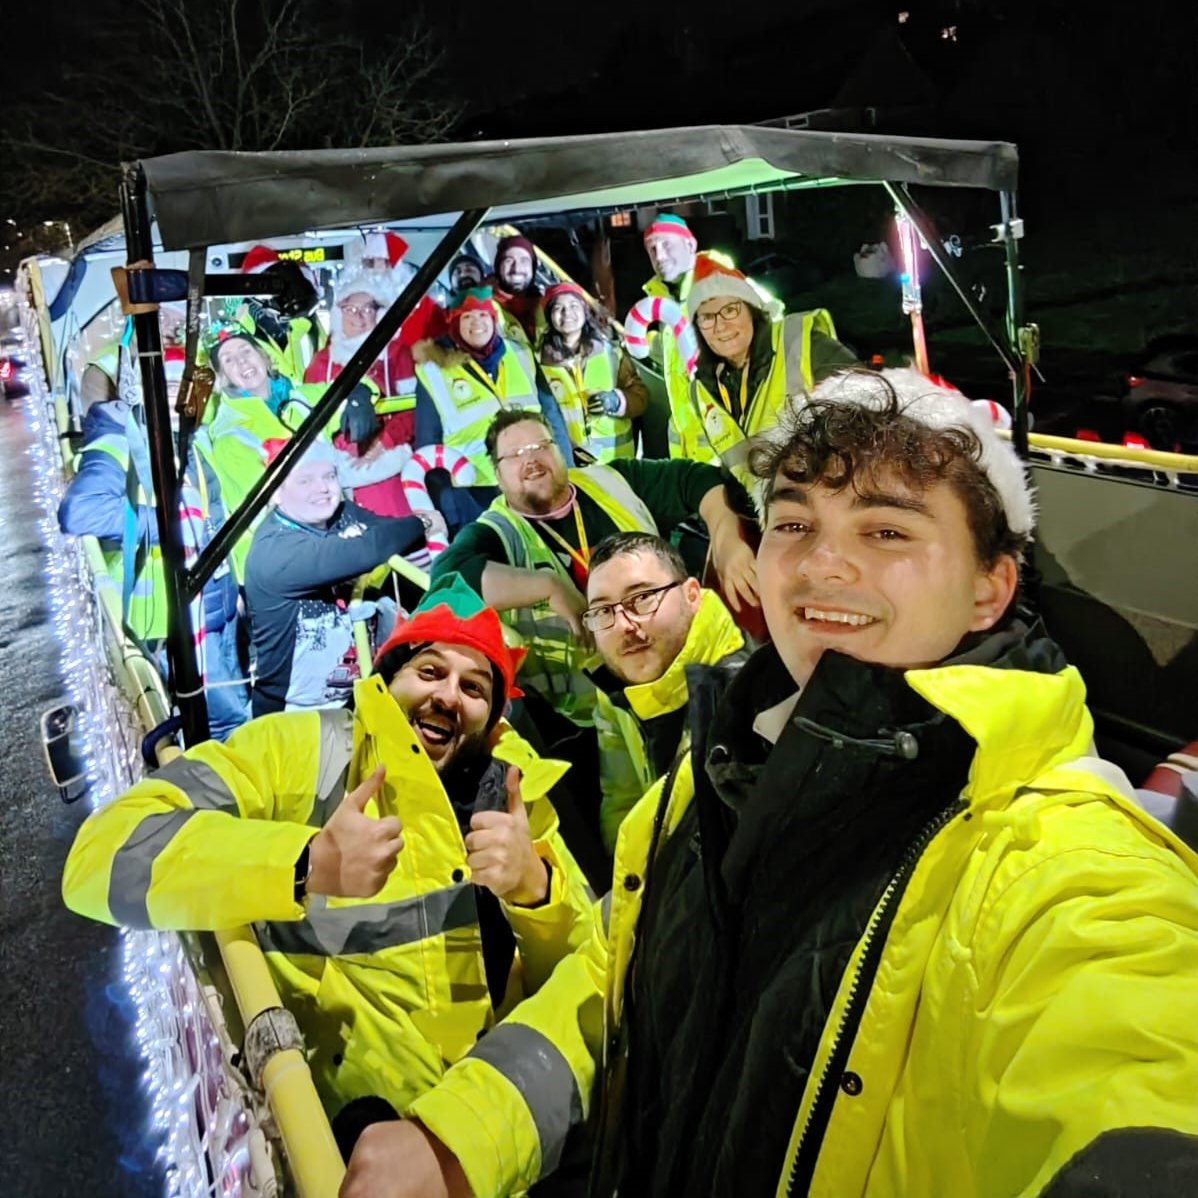 The #SantaBus brought Christmas to #Patcham last night! 🎅 Thank you to our wonderful guests @RHFBandH, @TeamDomenica and @hummingbirdbtn, and to everybody who came out to support us and make the night so special.